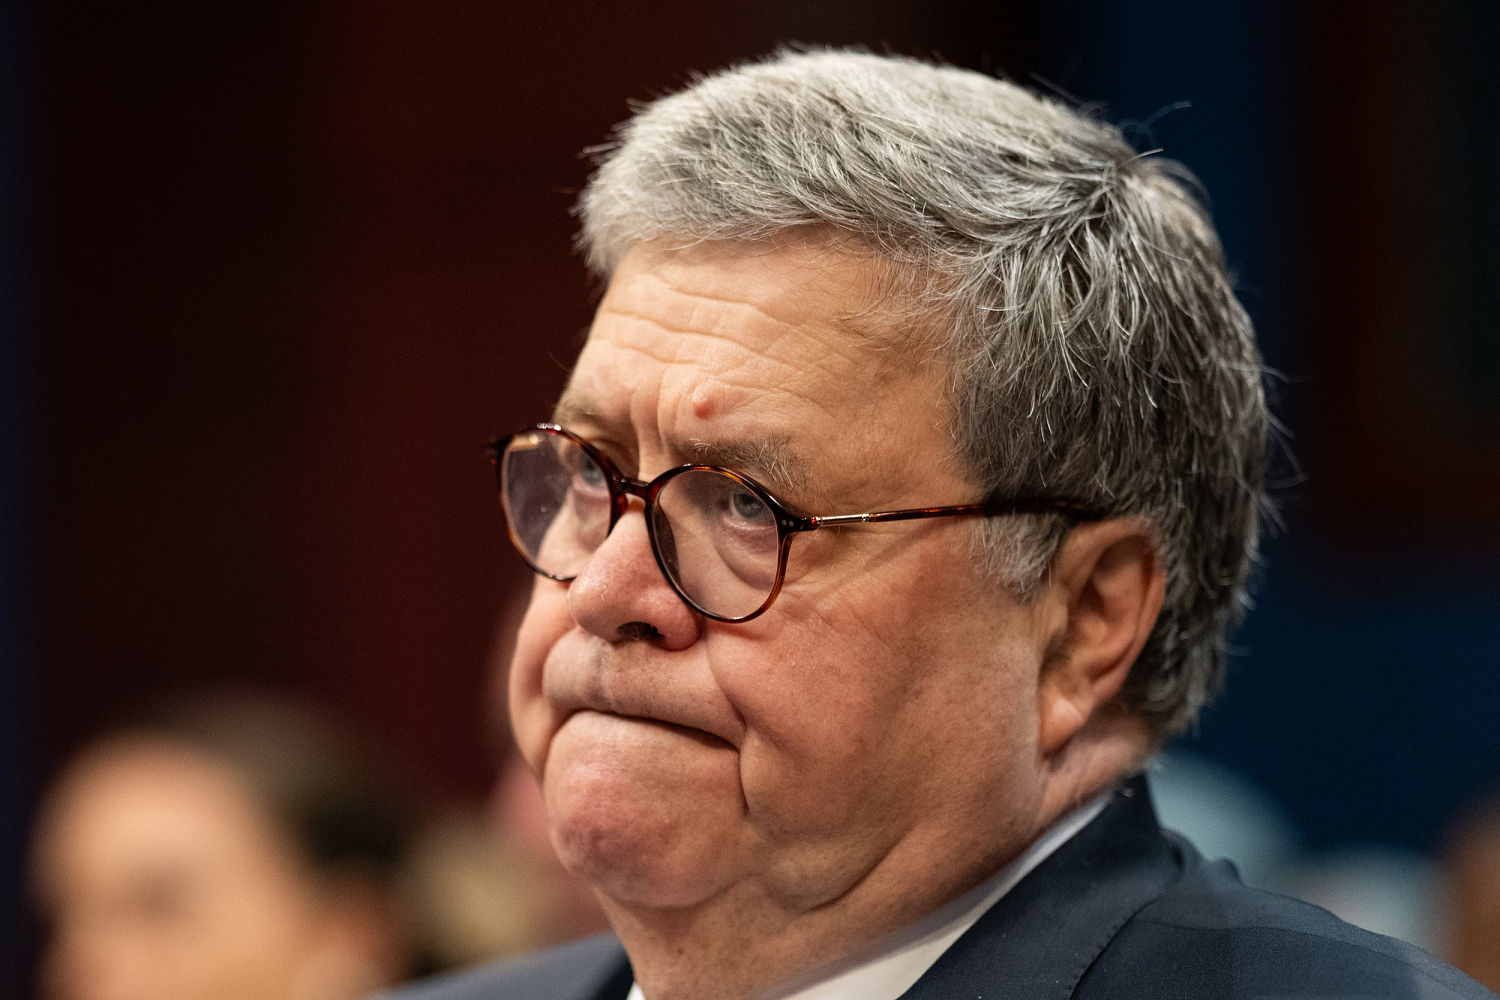 Barr reflects on Trump’s occasional rhetoric about killing people